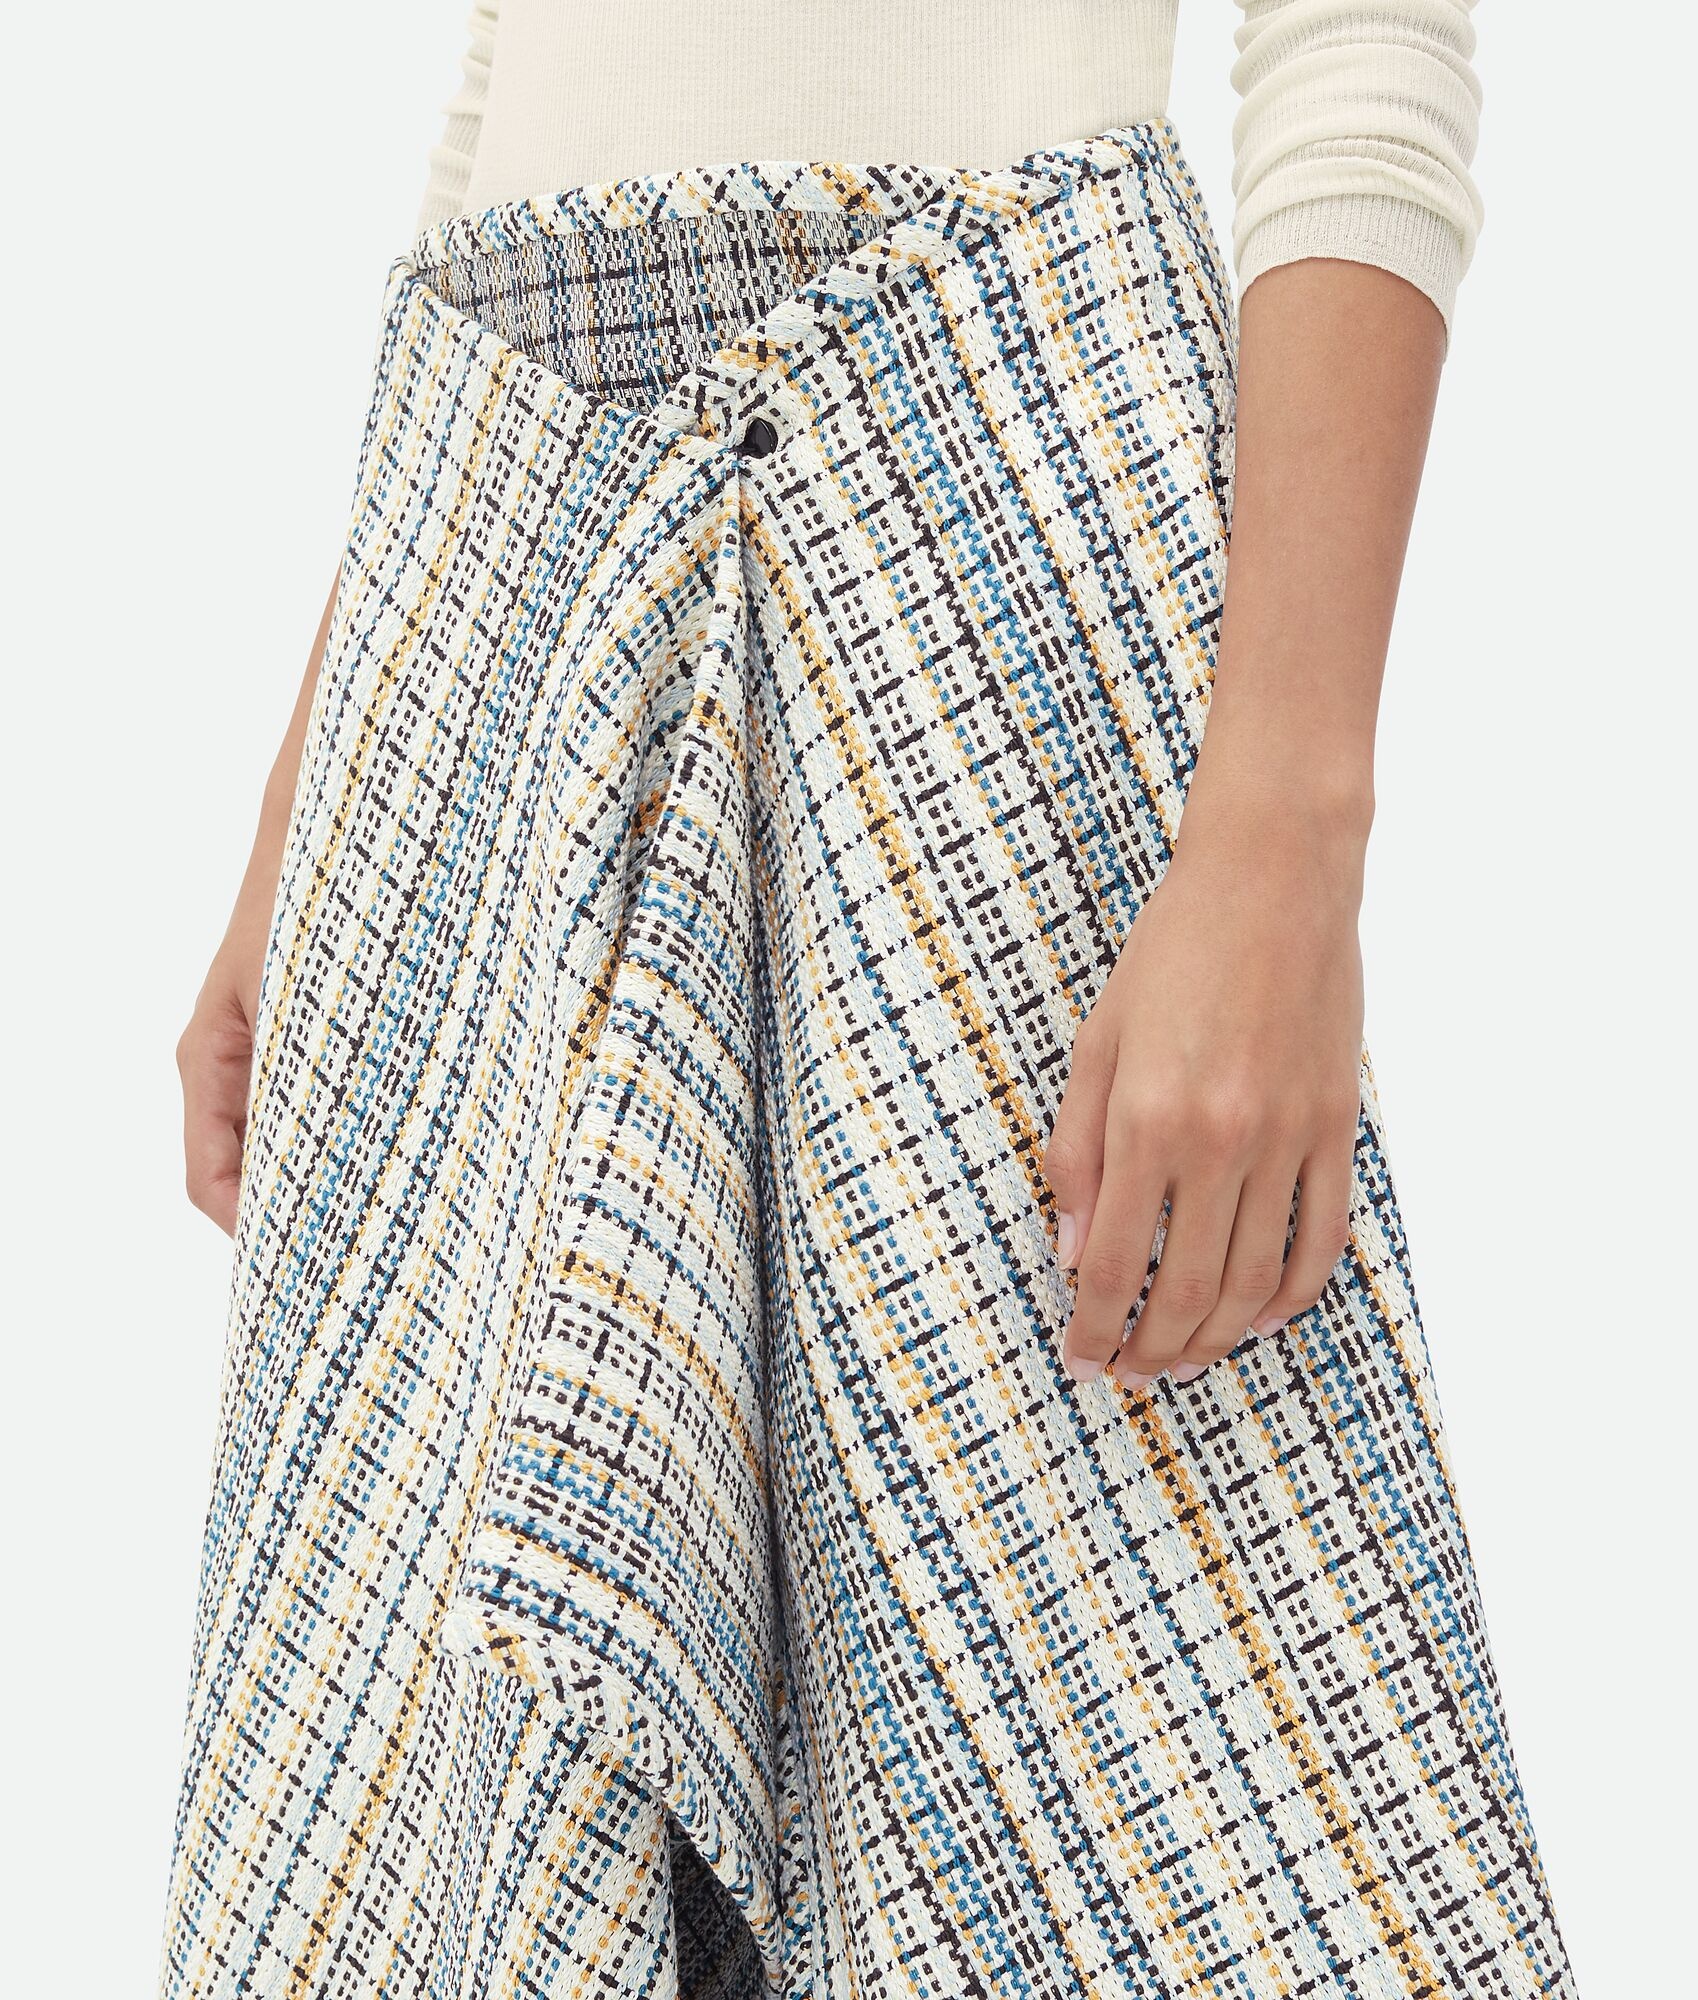 Cotton Check Wrapped Skirt - 5